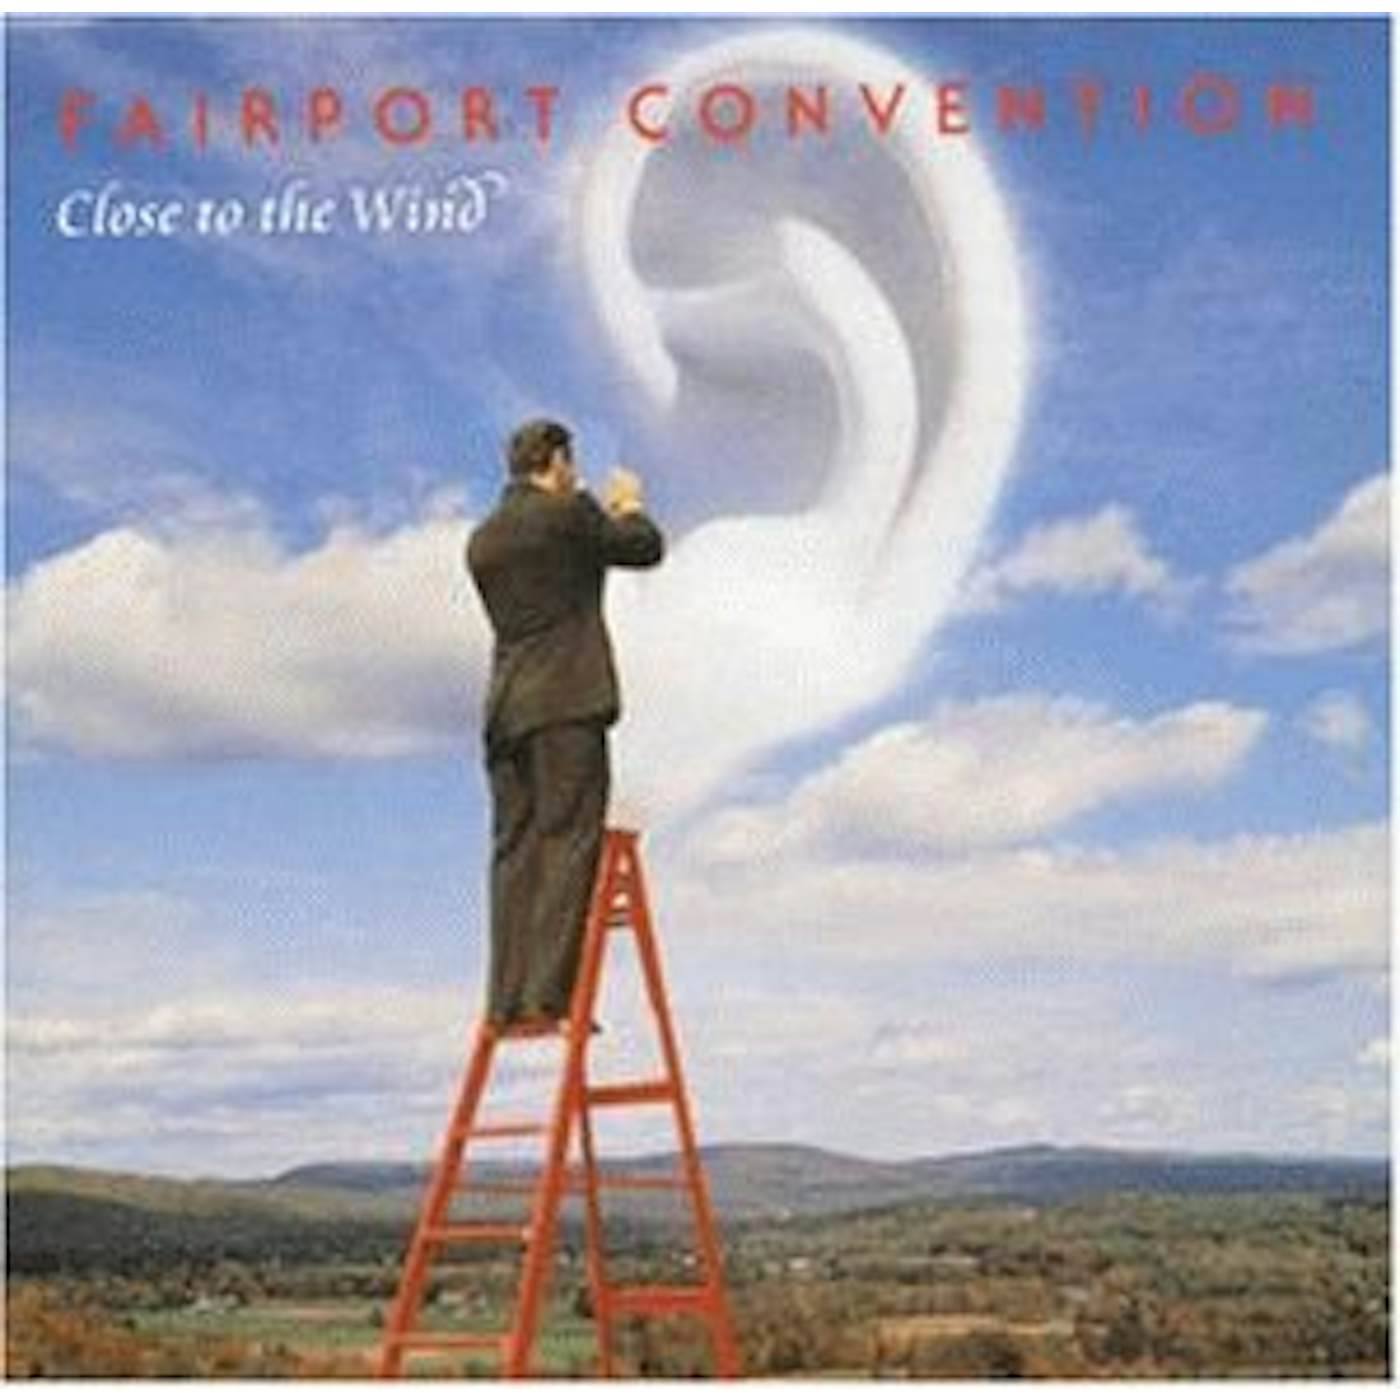 Fairport Convention CLOSE TO THE WIND CD